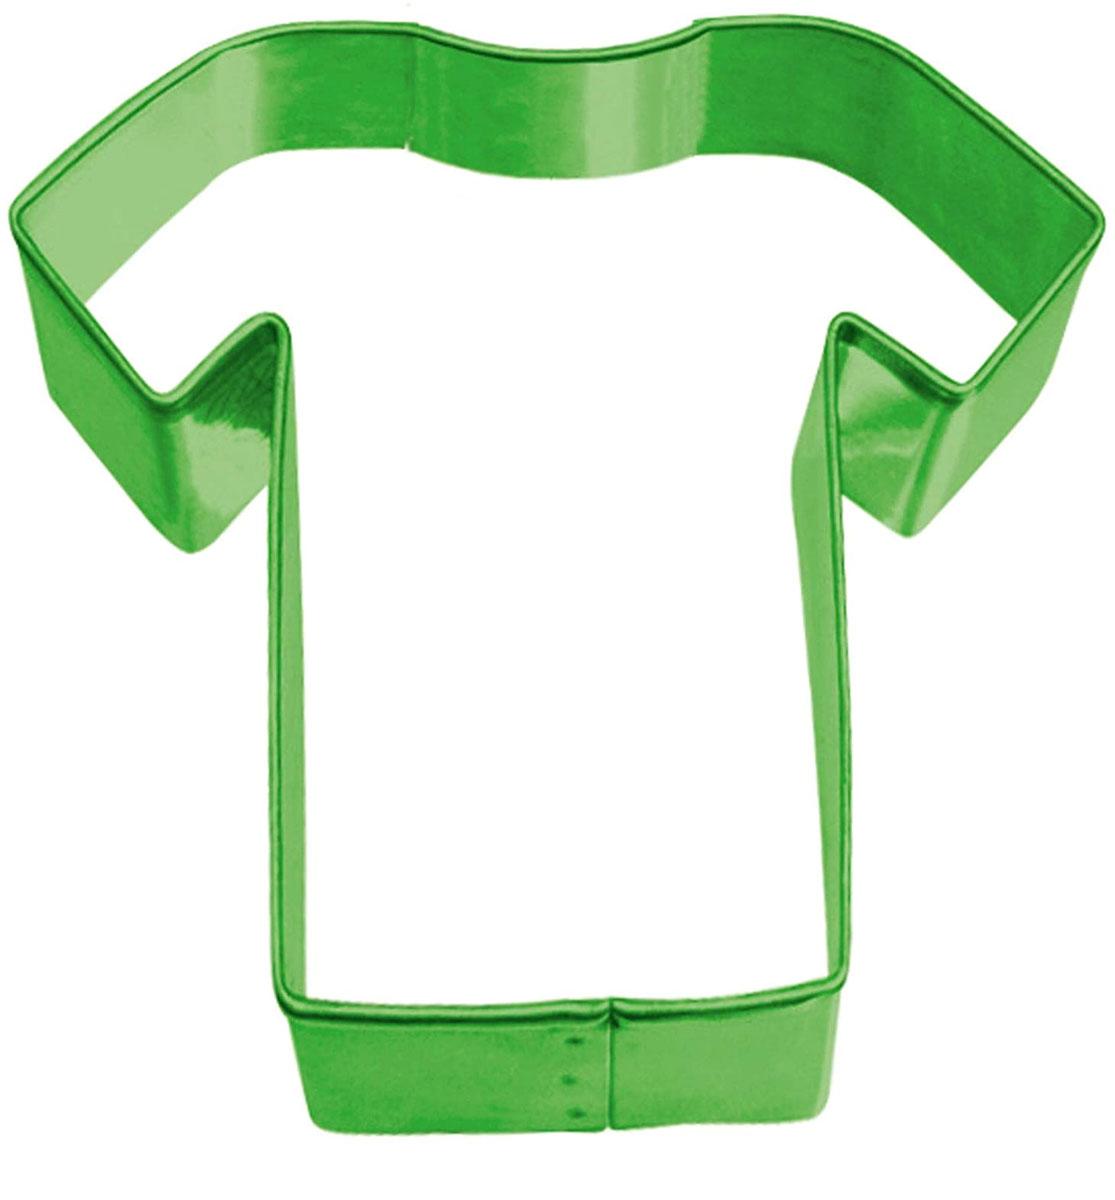 Football Shirt Cookie Cutter by Amscan 9903018 available here at Karnival Costumes online party shop